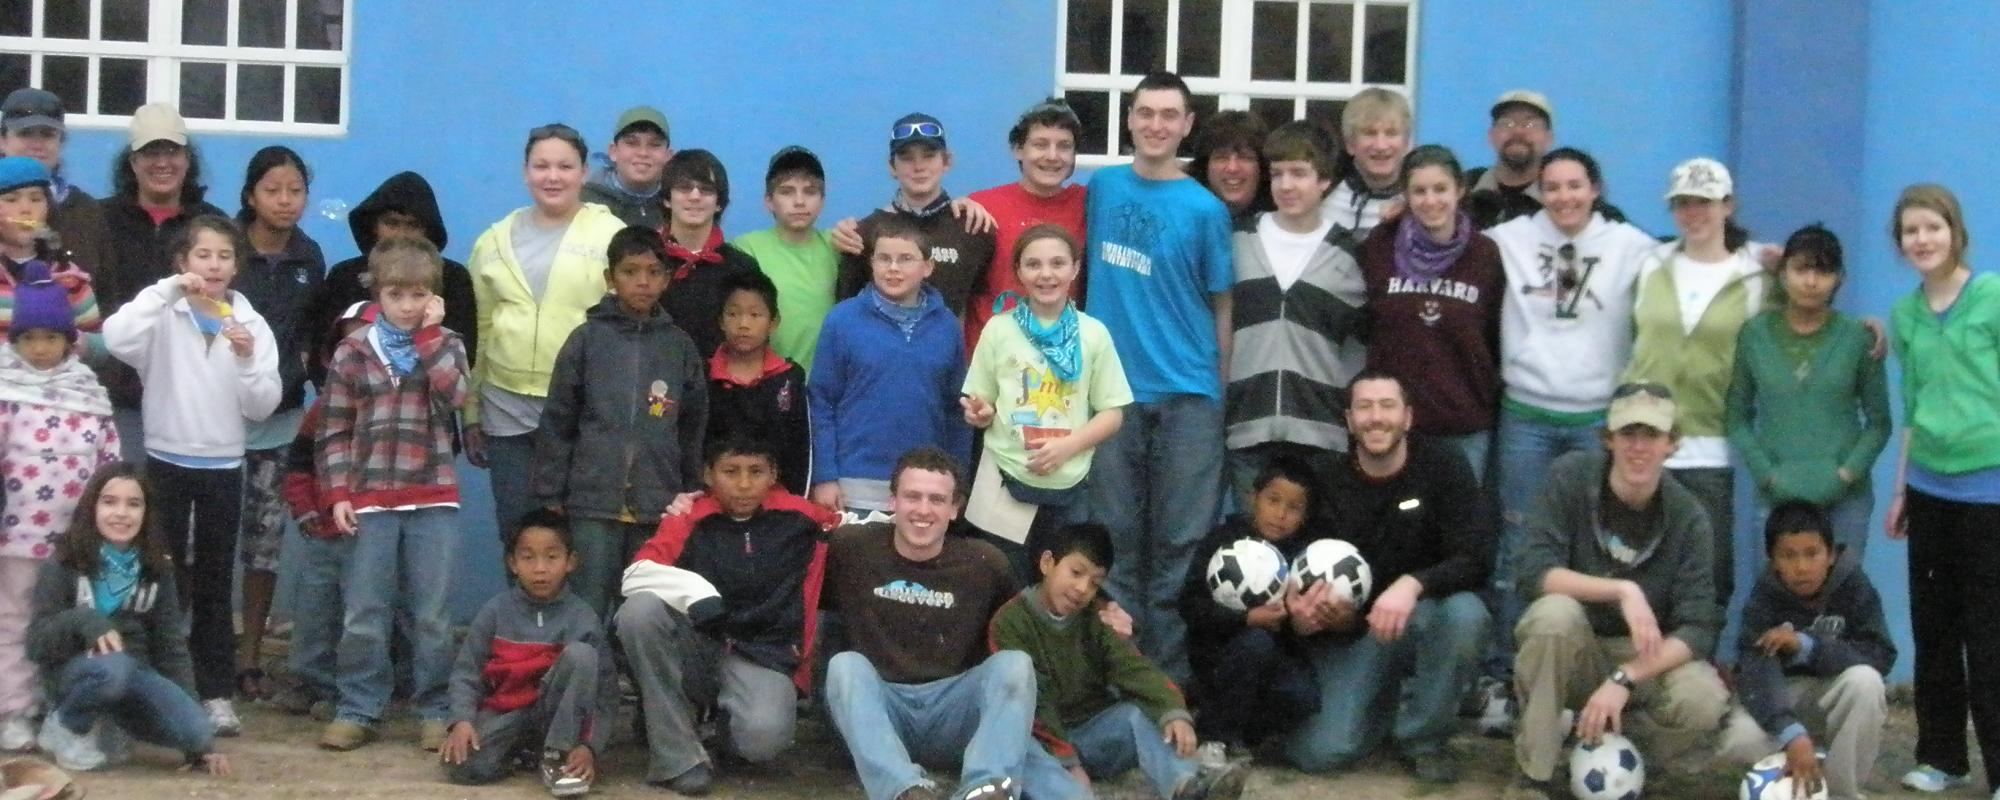 group of volunteers and kids with soccer balls